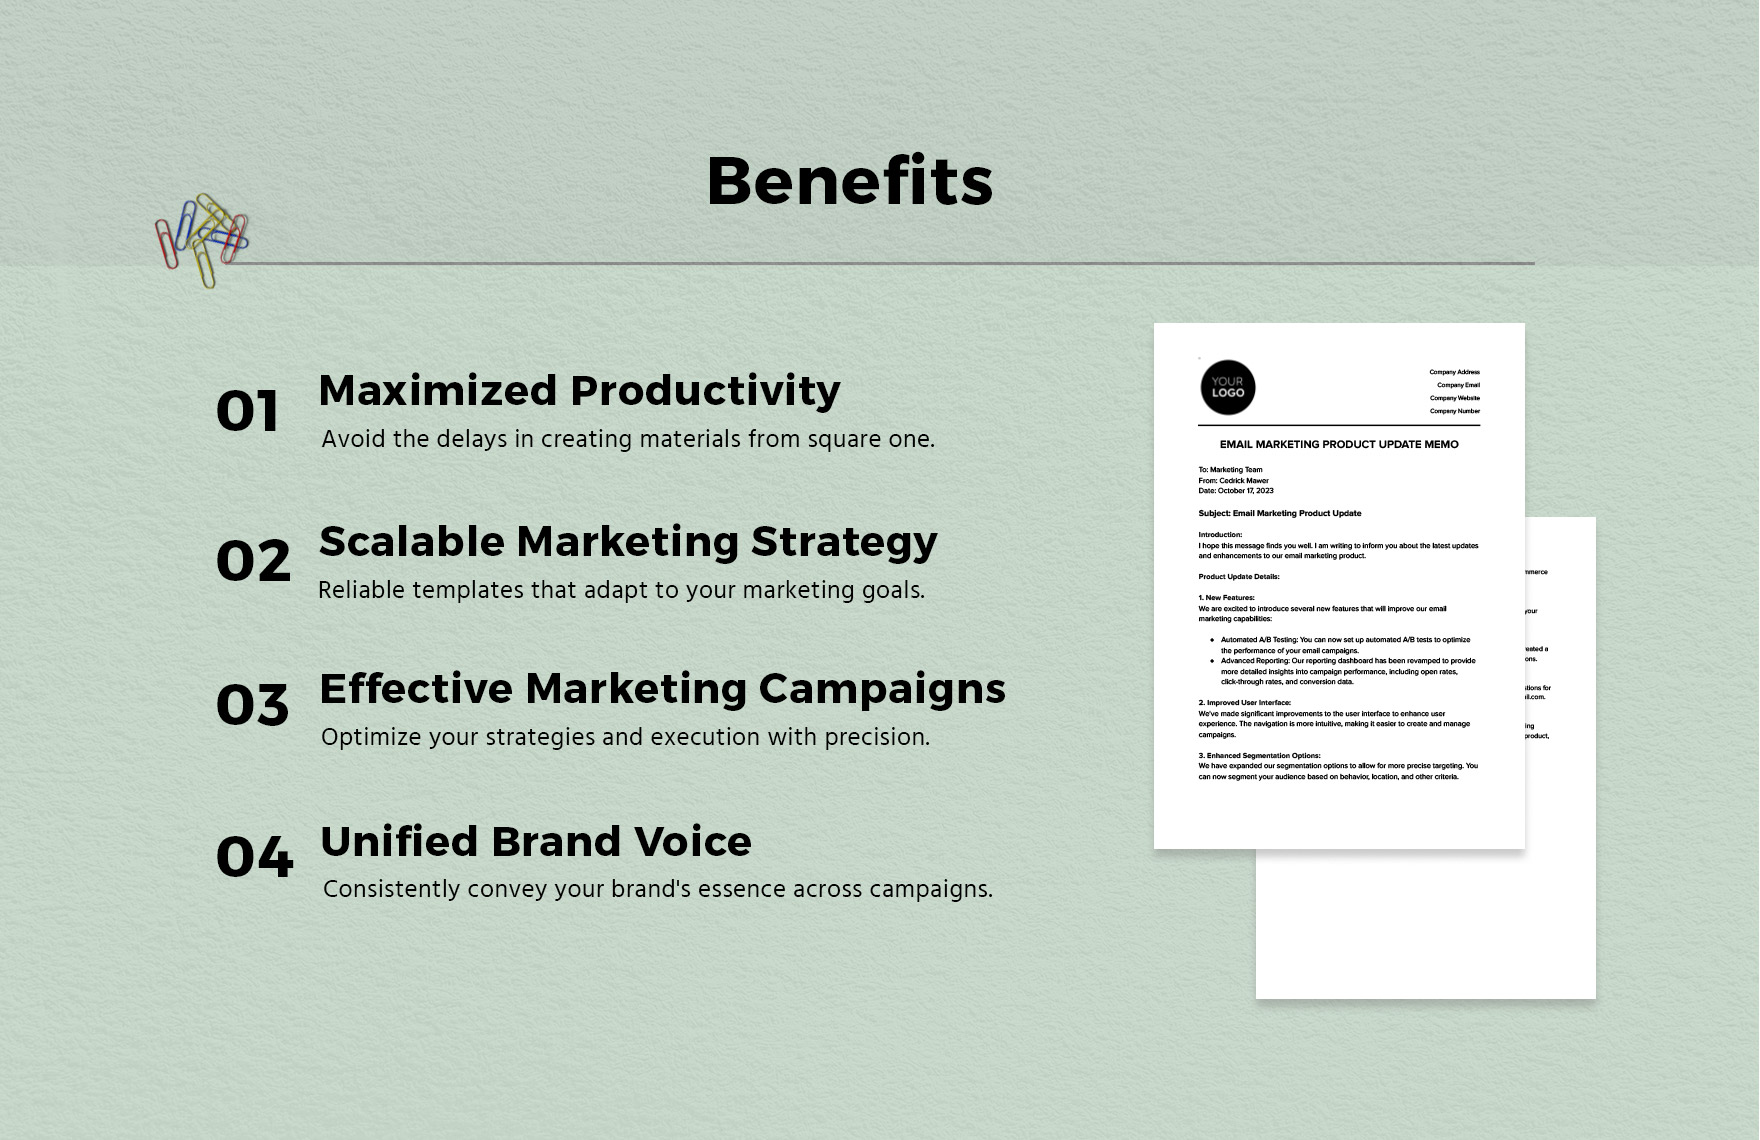 Email Marketing Product Update Memo Template